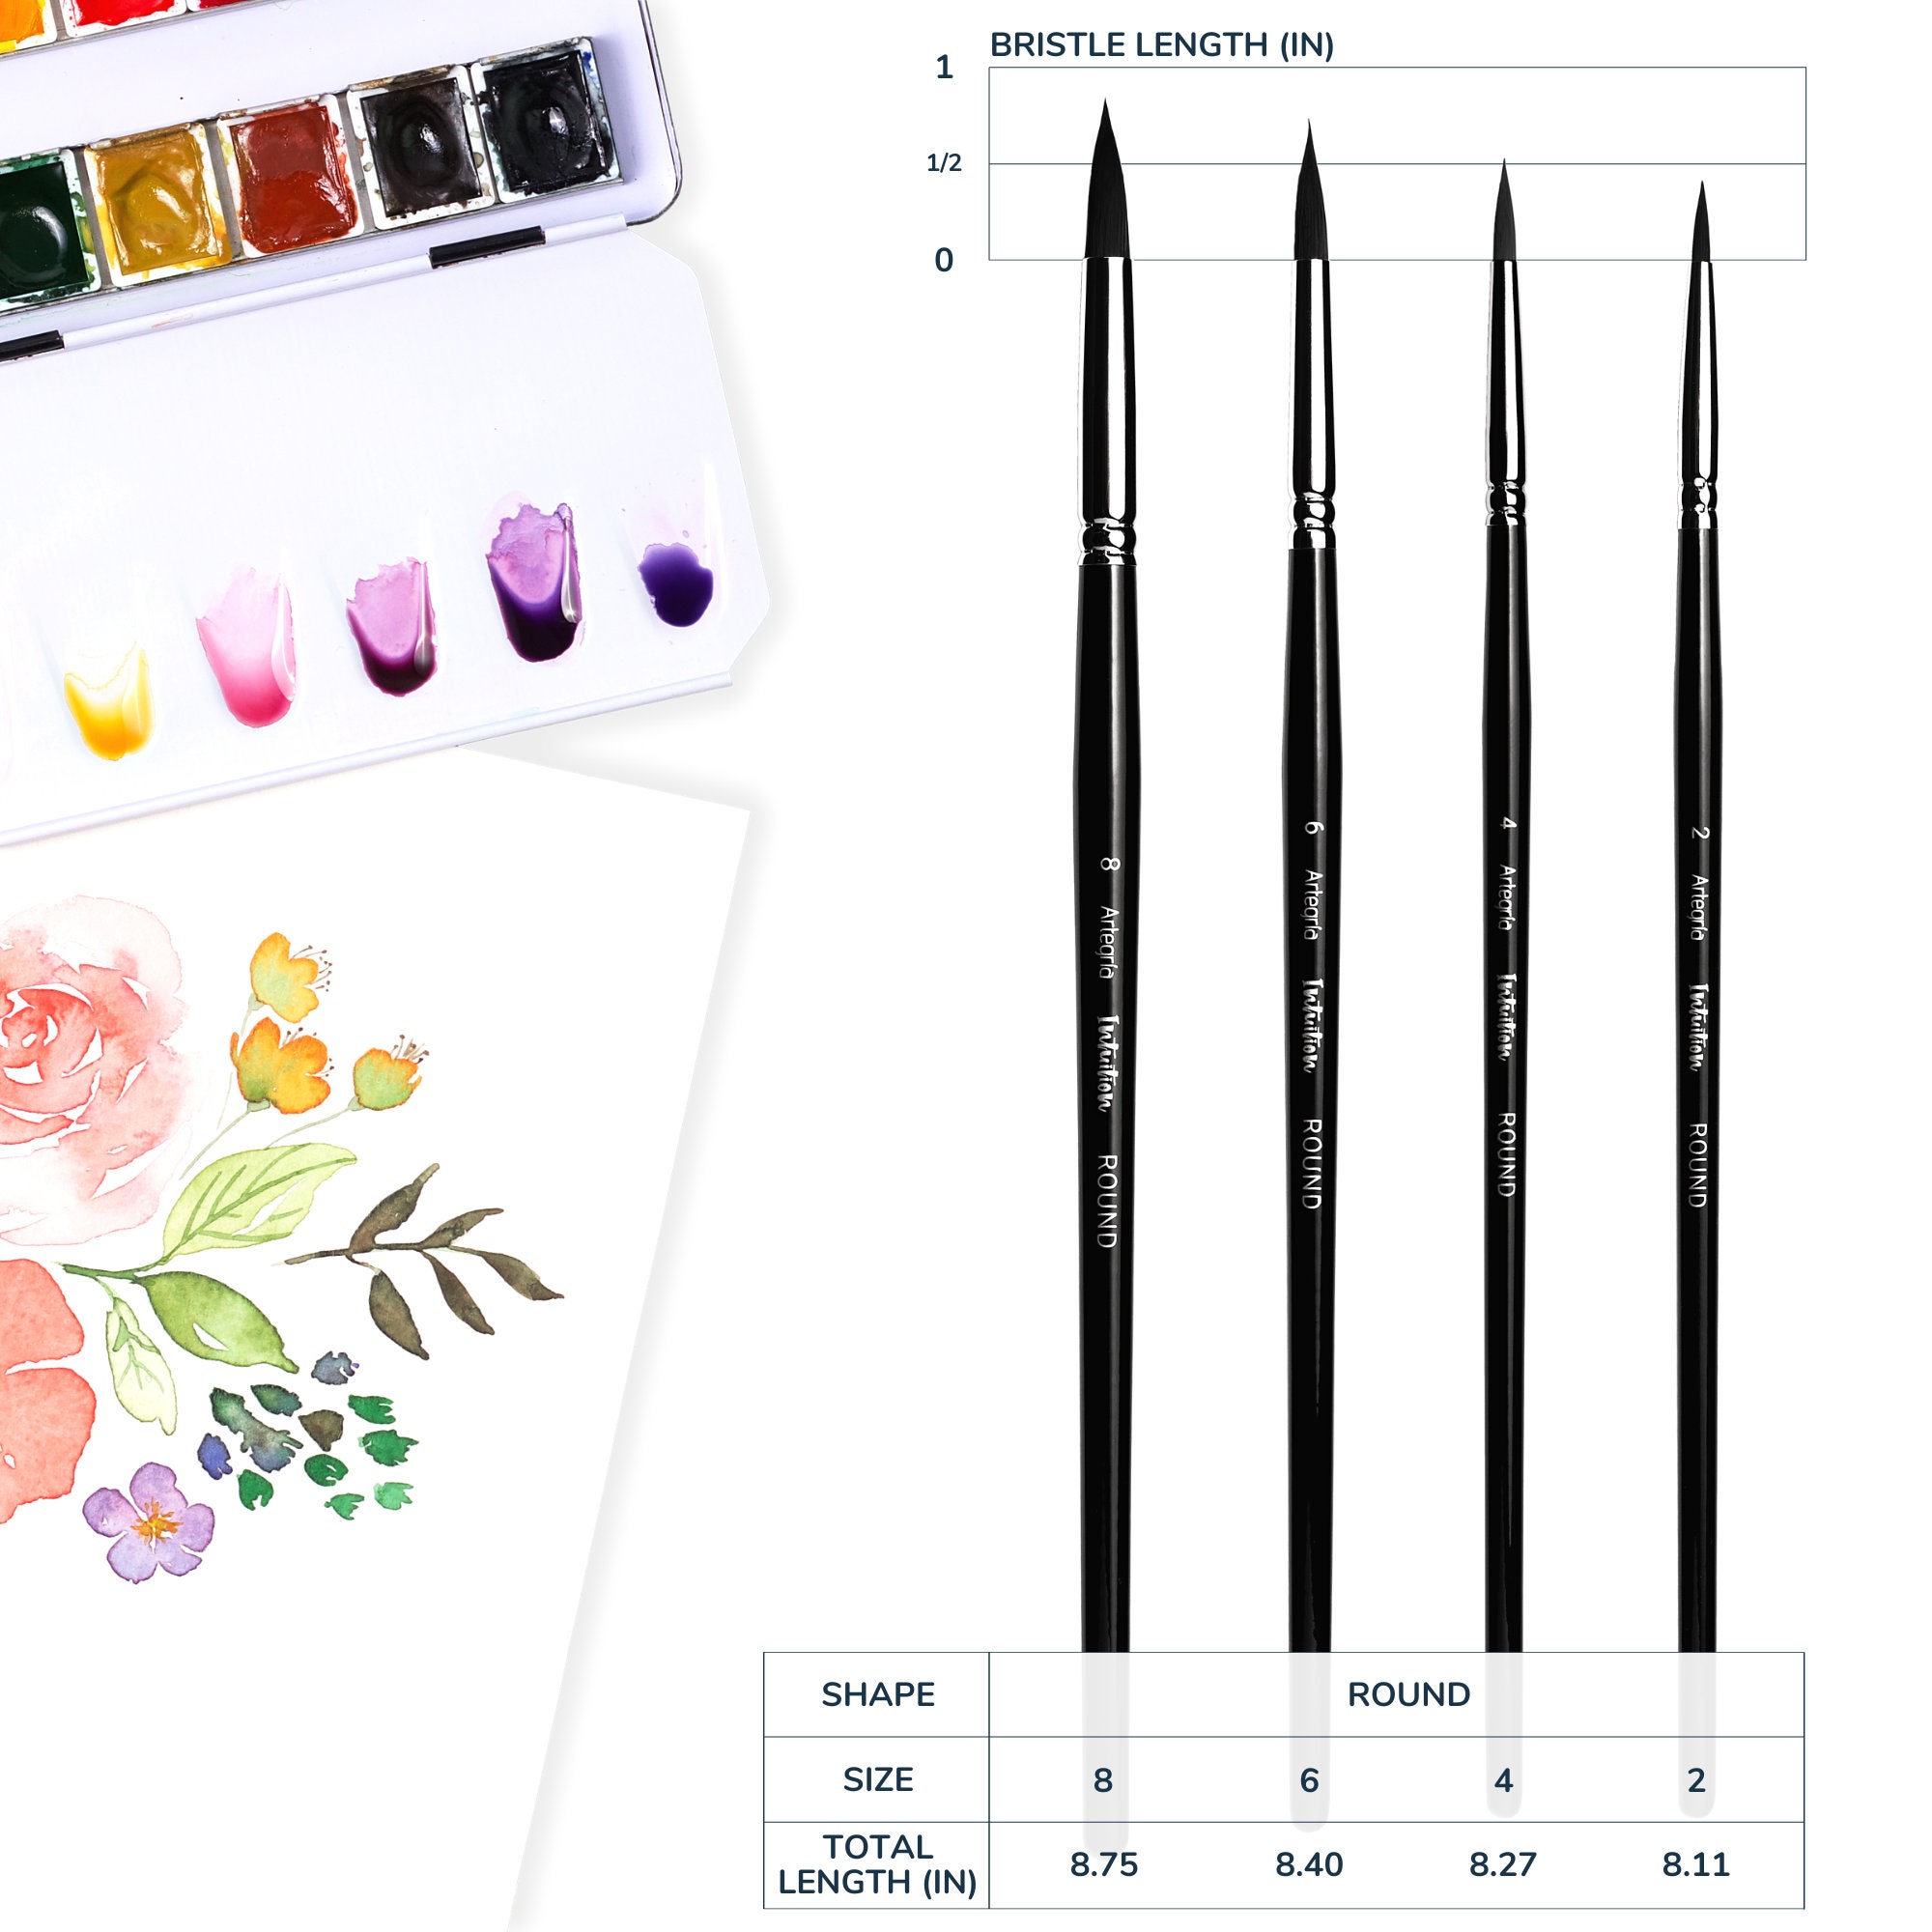 ARTEGRIA Detail Paint Brush Set 8 Miniature Paint Brushes for Small Scale  Model Art, Paint by Numbers for Adults Acrylic Watercolor Oil 